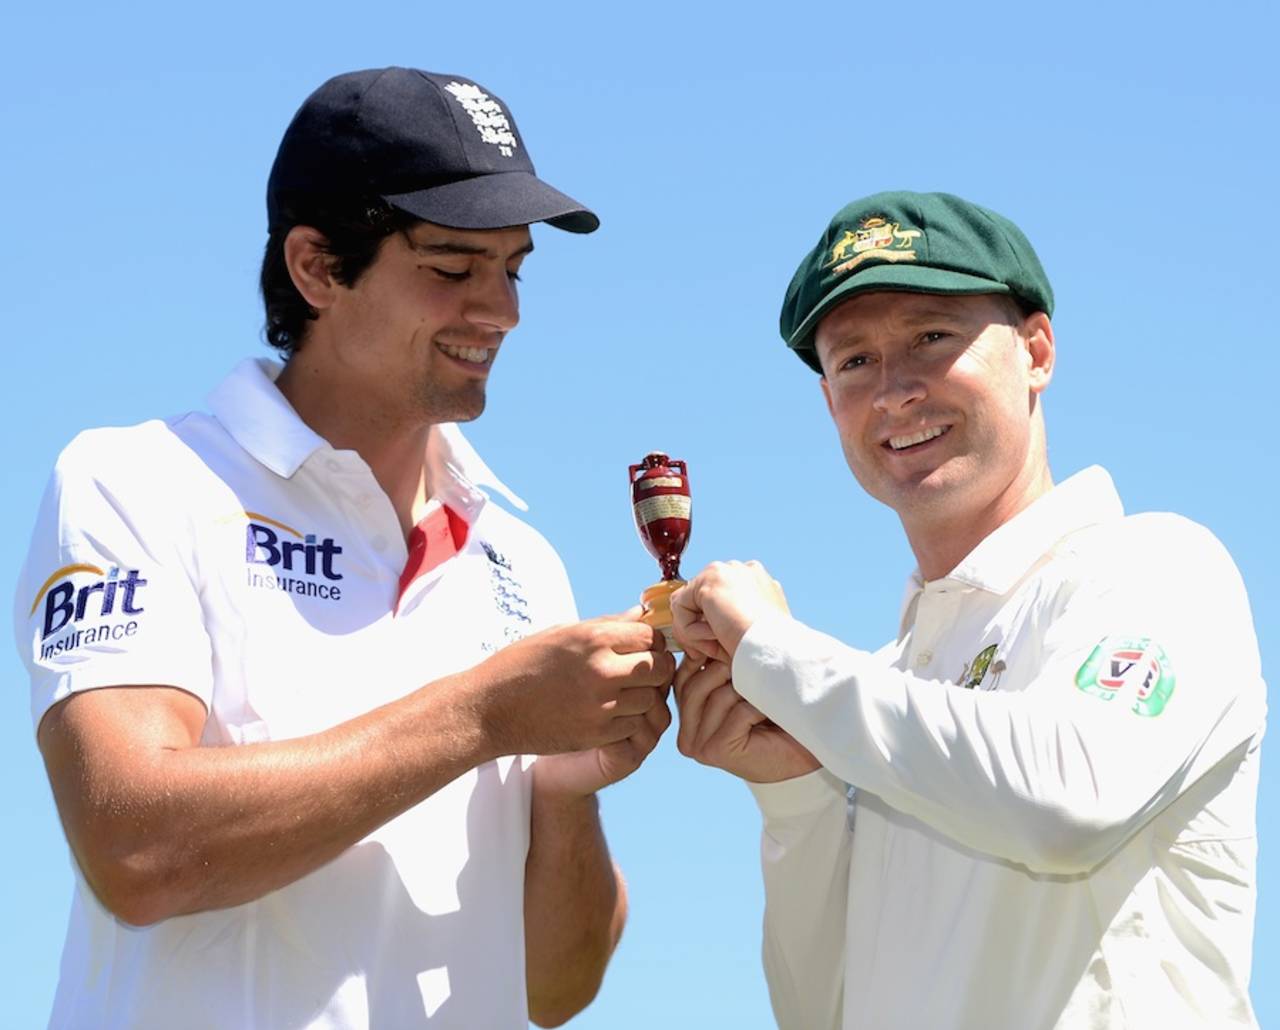 Alastair Cook and Michael Clarke with the Ashes, Nottingham, July 9, 2013